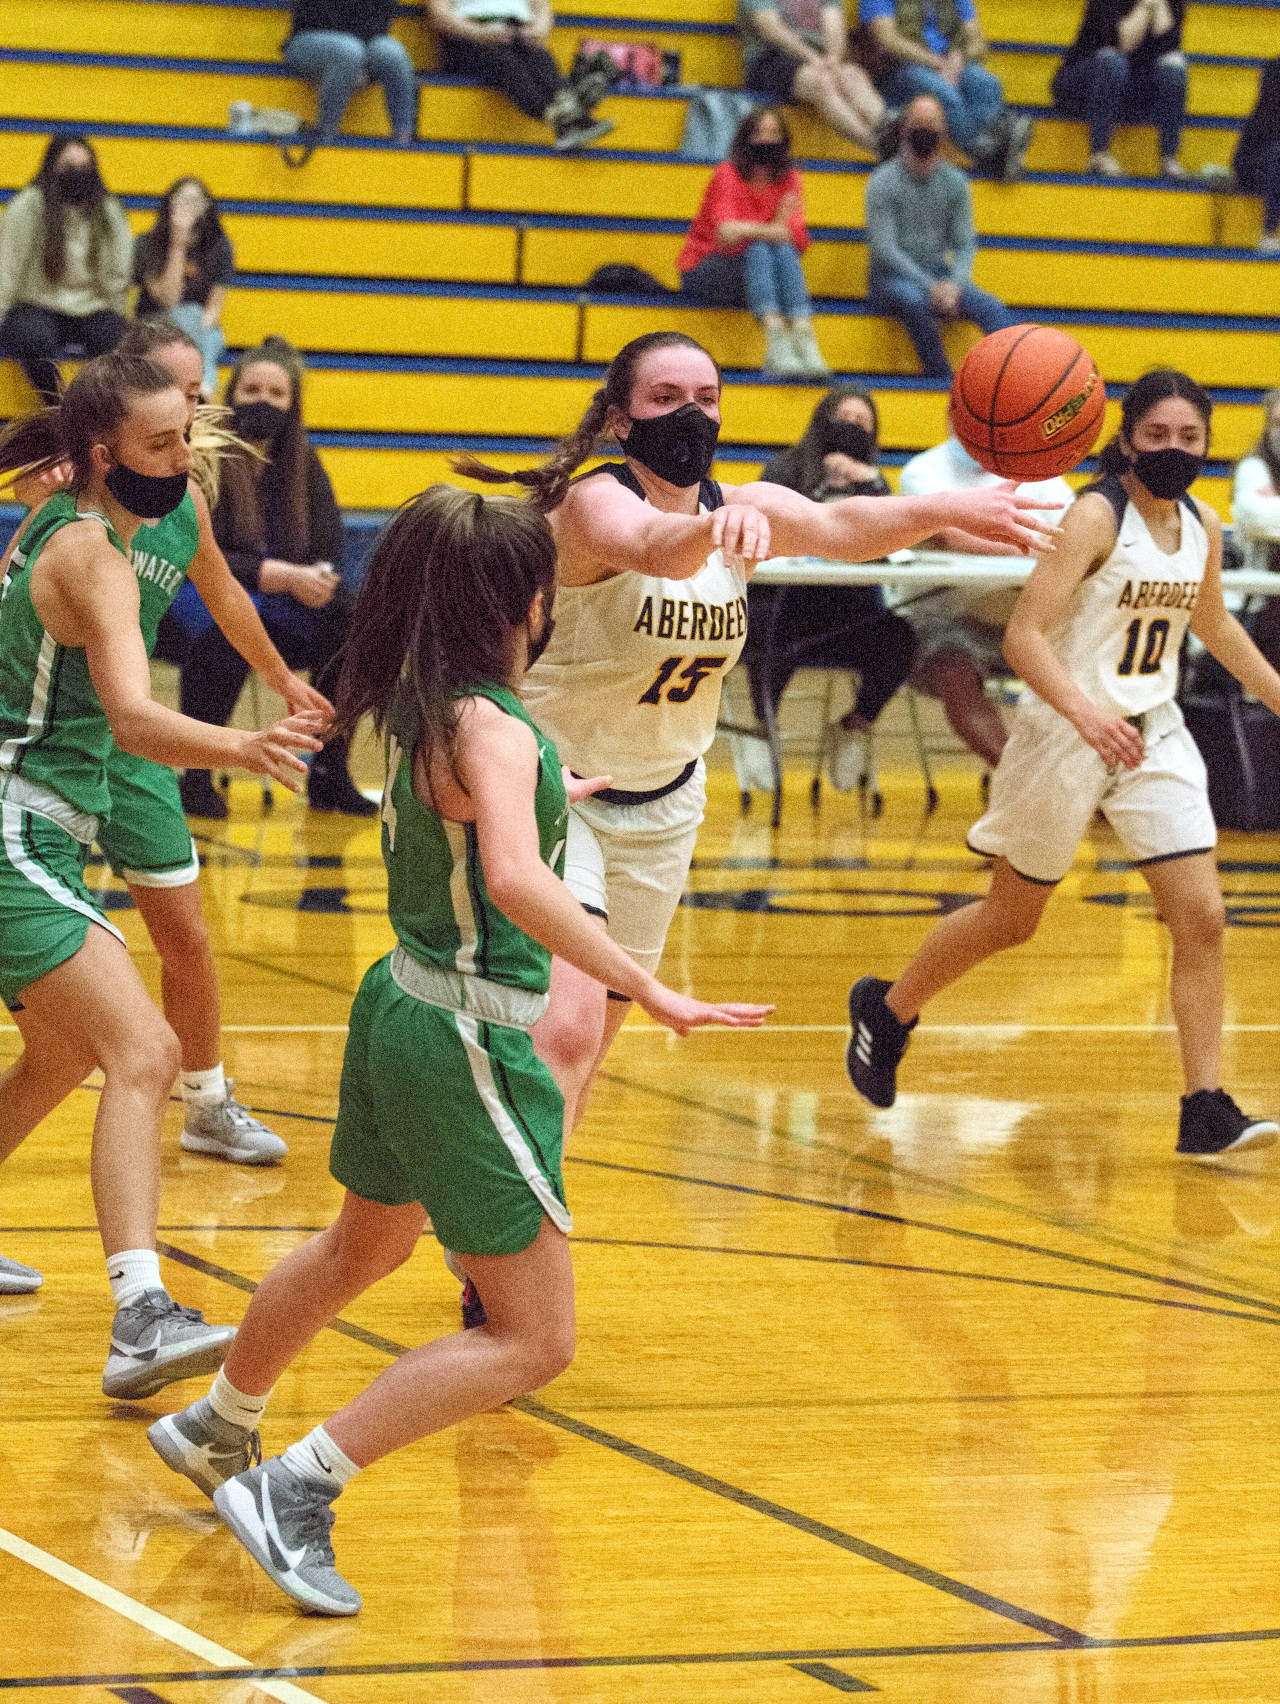 RYAN SPARKS | THE DAILY WORLD Aberdeen’s Zoe Filan (15) passes the ball during the second half of the Bobcats’ 72-19 season-opening loss on Monday at Sam Benn Gym in Aberdeen.